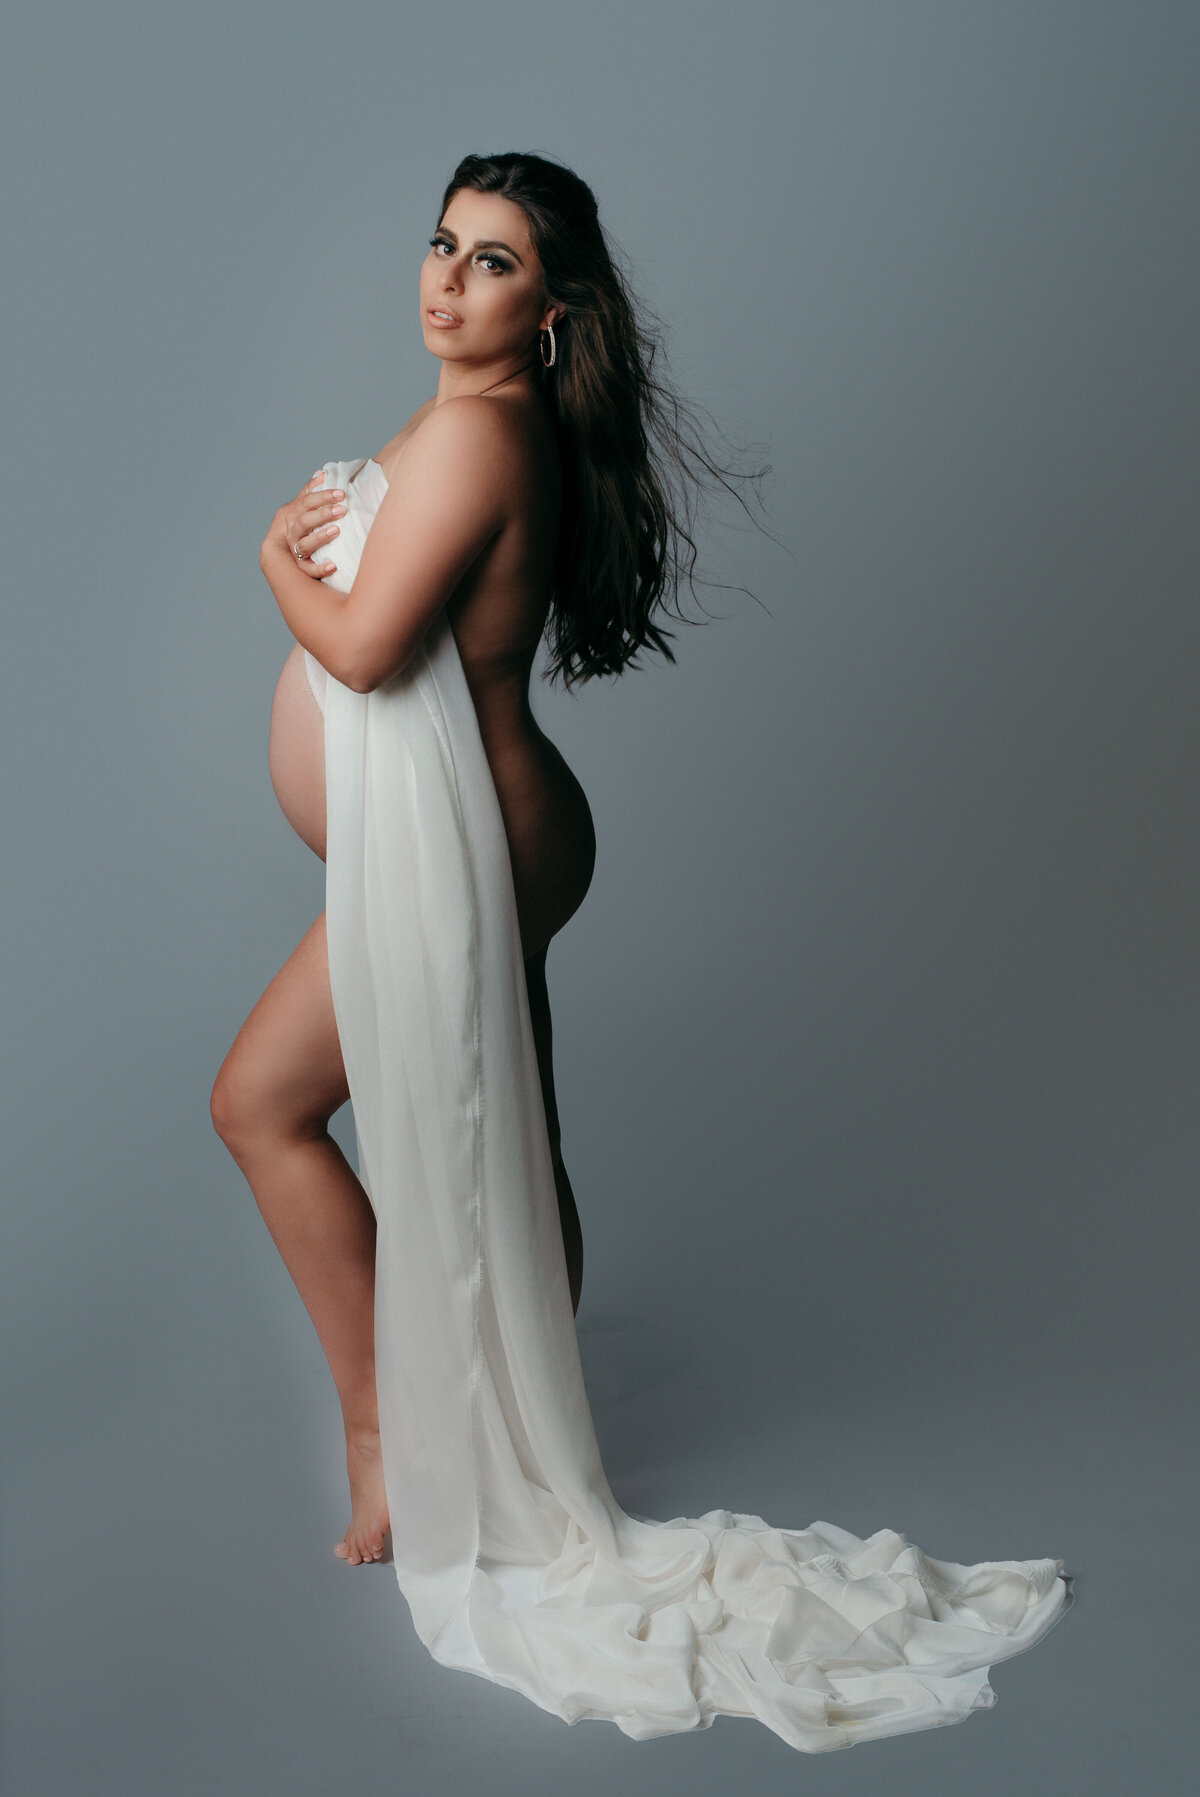 Woman standing in maternity pose holding white fabric draped over baby bump